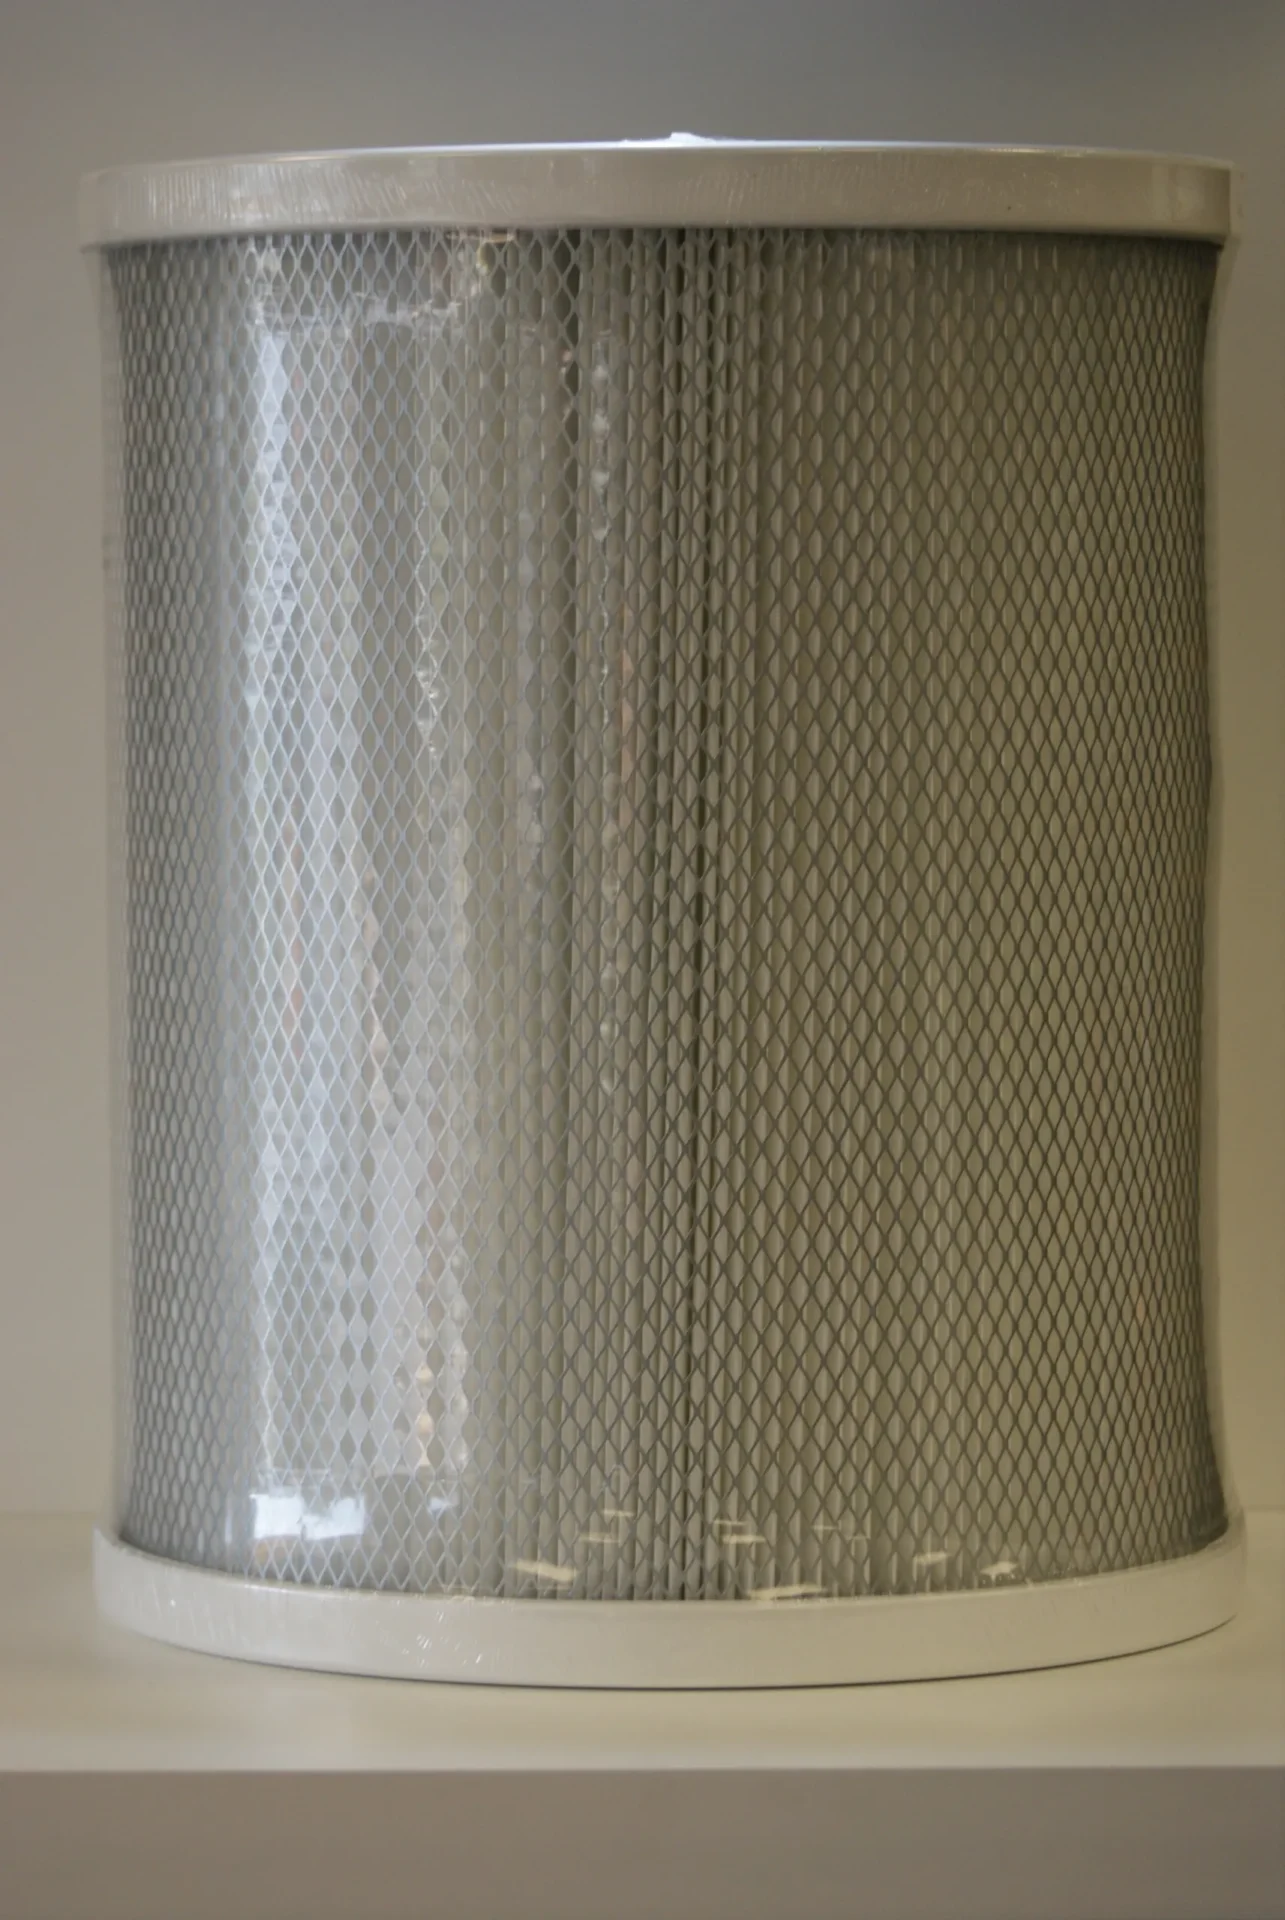 A close up of the front end of a cylinder